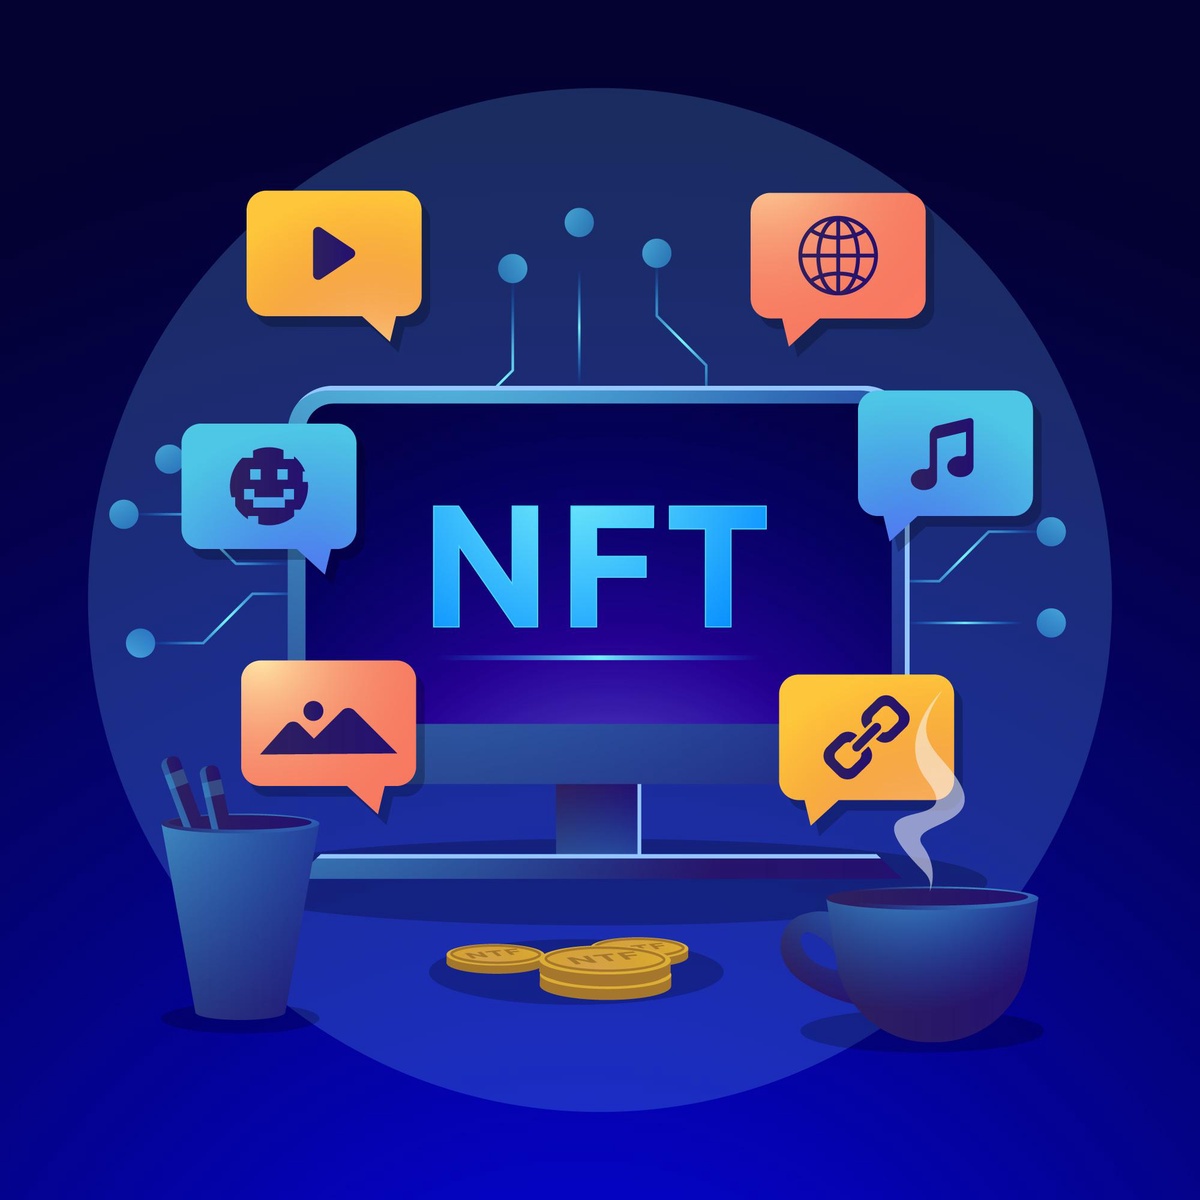 NFT Marketplace Success: Harnessing New Marketing Trends for Creators and Sellers